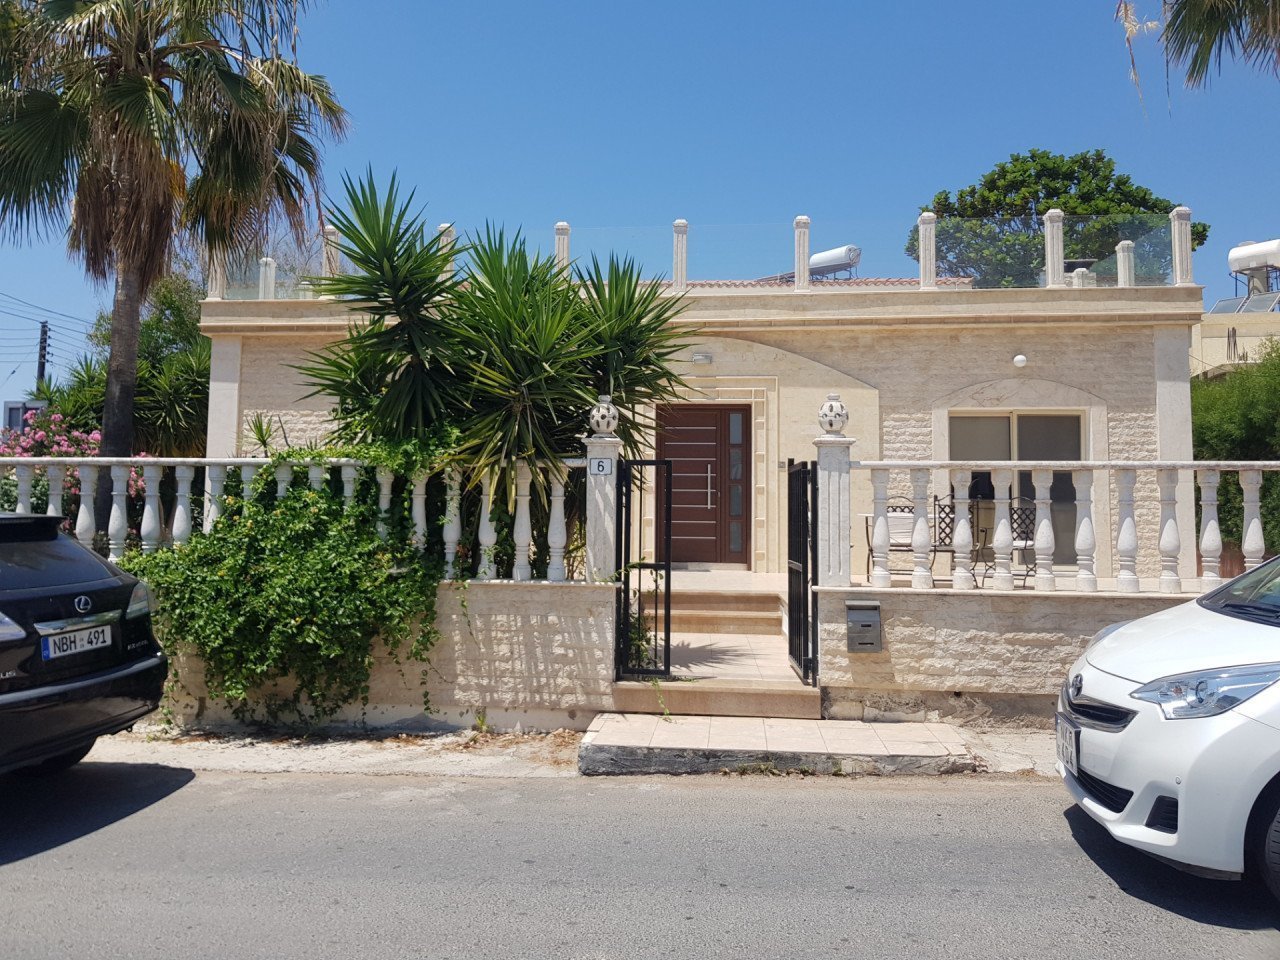 Property for Rent: House (Detached) in Trimithousa, Paphos for Rent | Key Realtor Cyprus